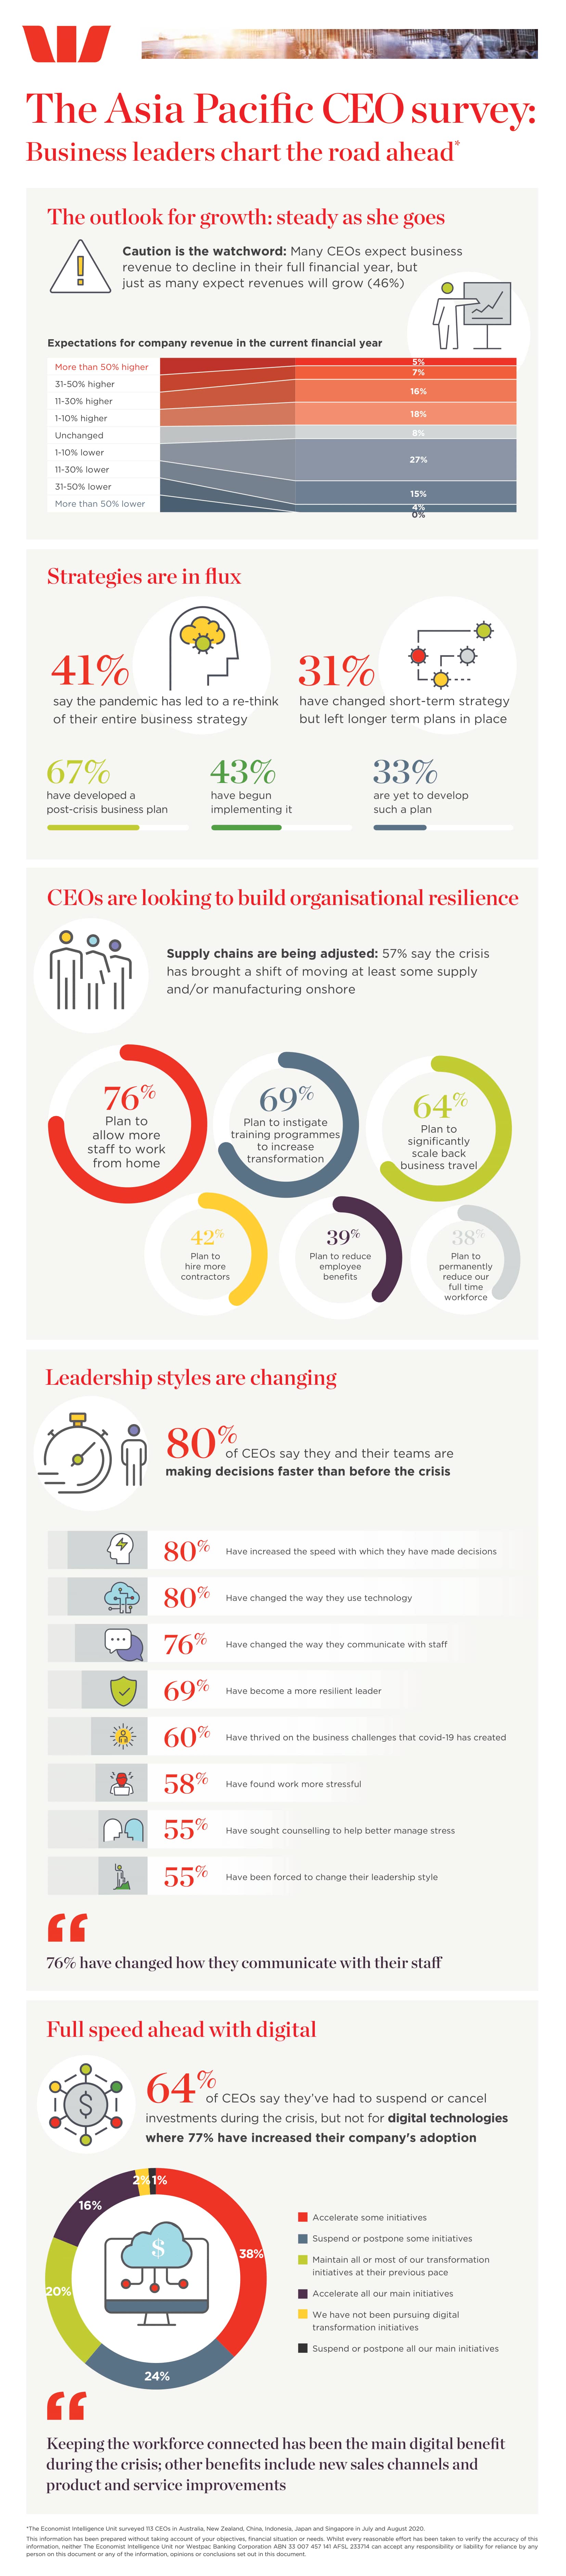 Infographic | The Asia Pacific CEO survey